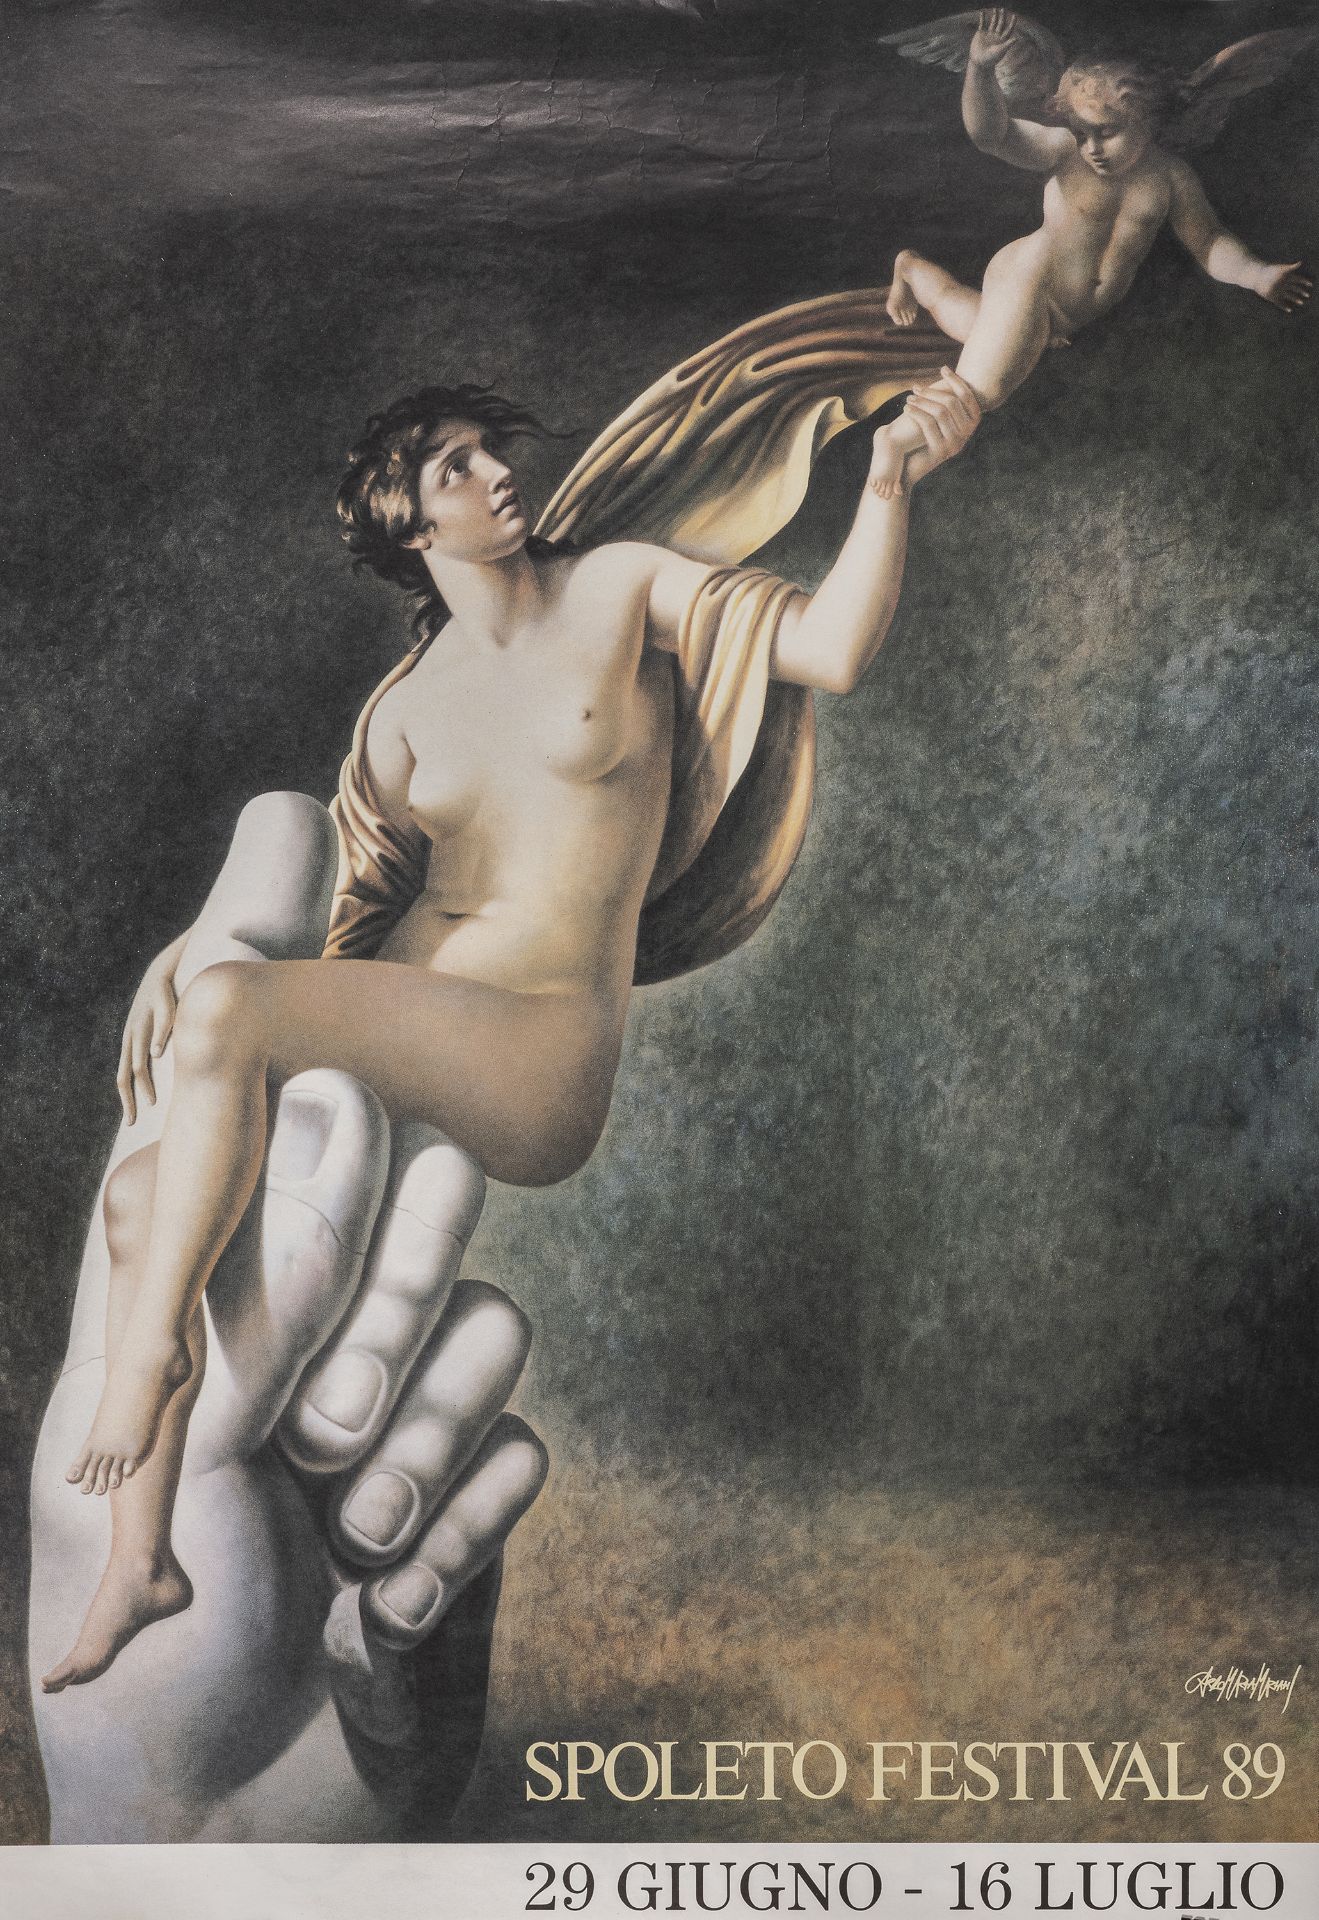 POSTER BY CARLO MARIA MARIANI FOR THE SPOLETO FESTIVAL 1989